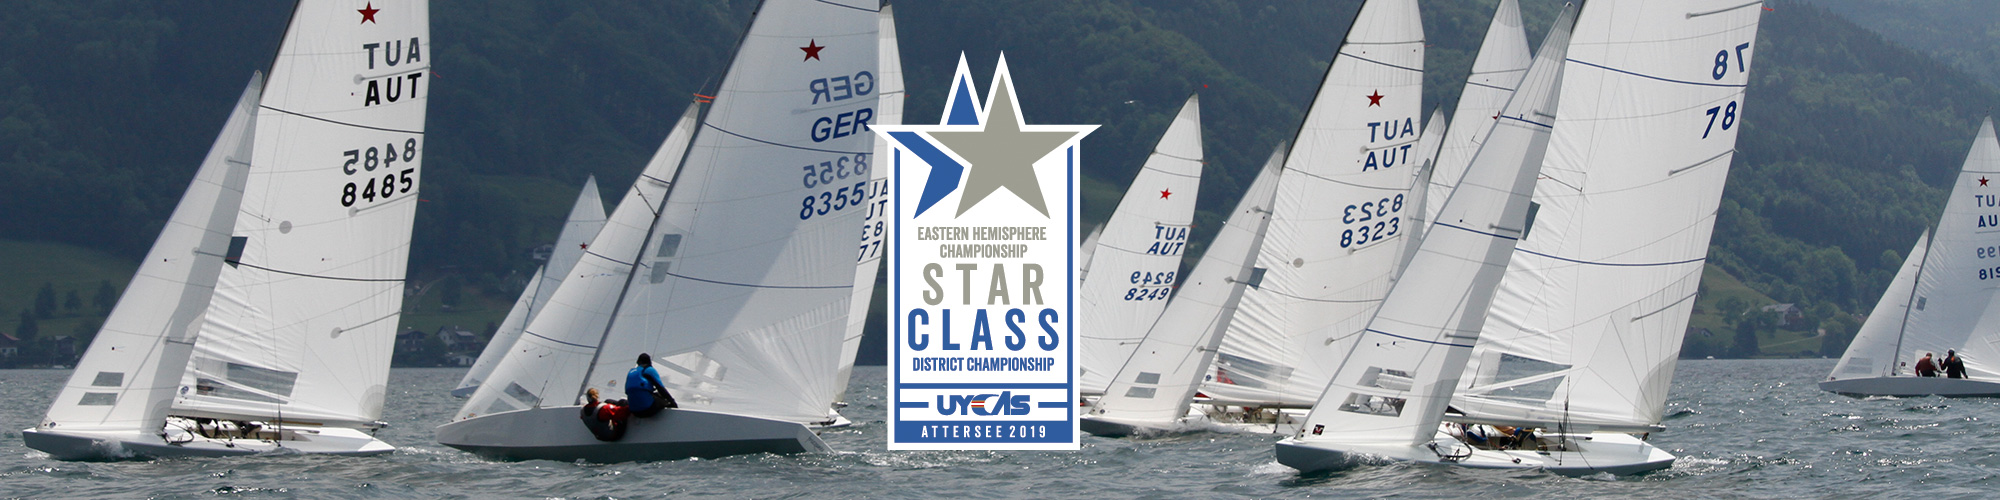  Star  Eastern Hemisphere Championship  Attersee AUT  Day 1, Augie Diaz USA clear leader 